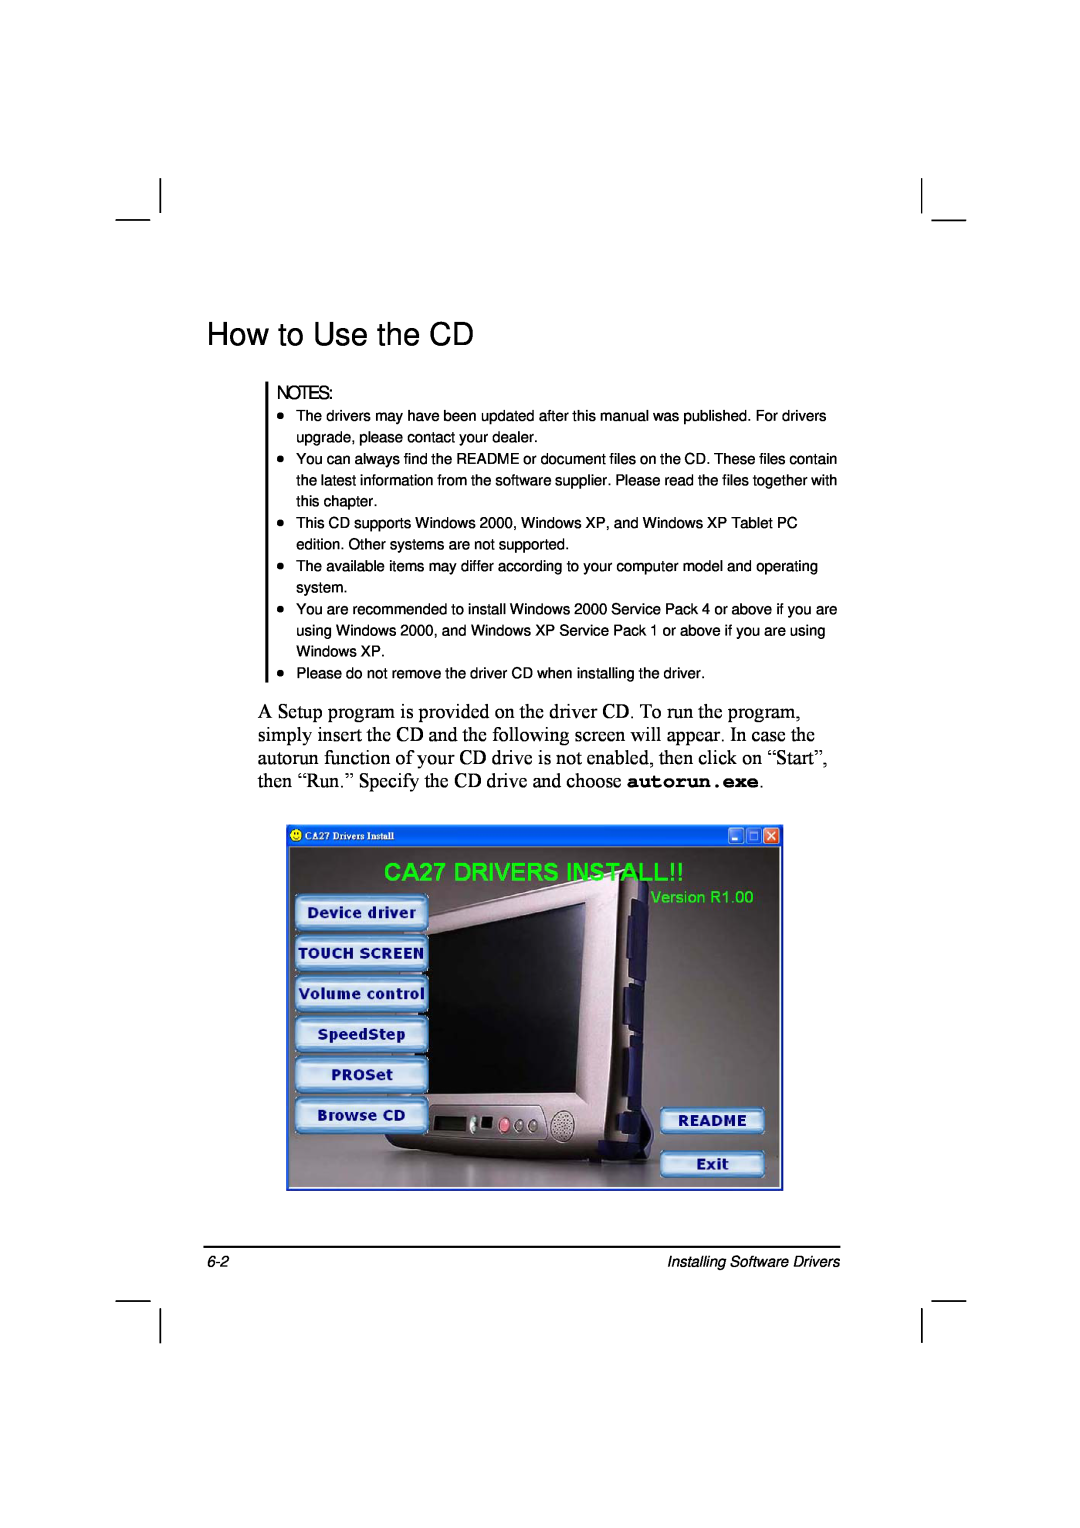 TAG 20 Series manual How to Use the CD, Installing Software Drivers 